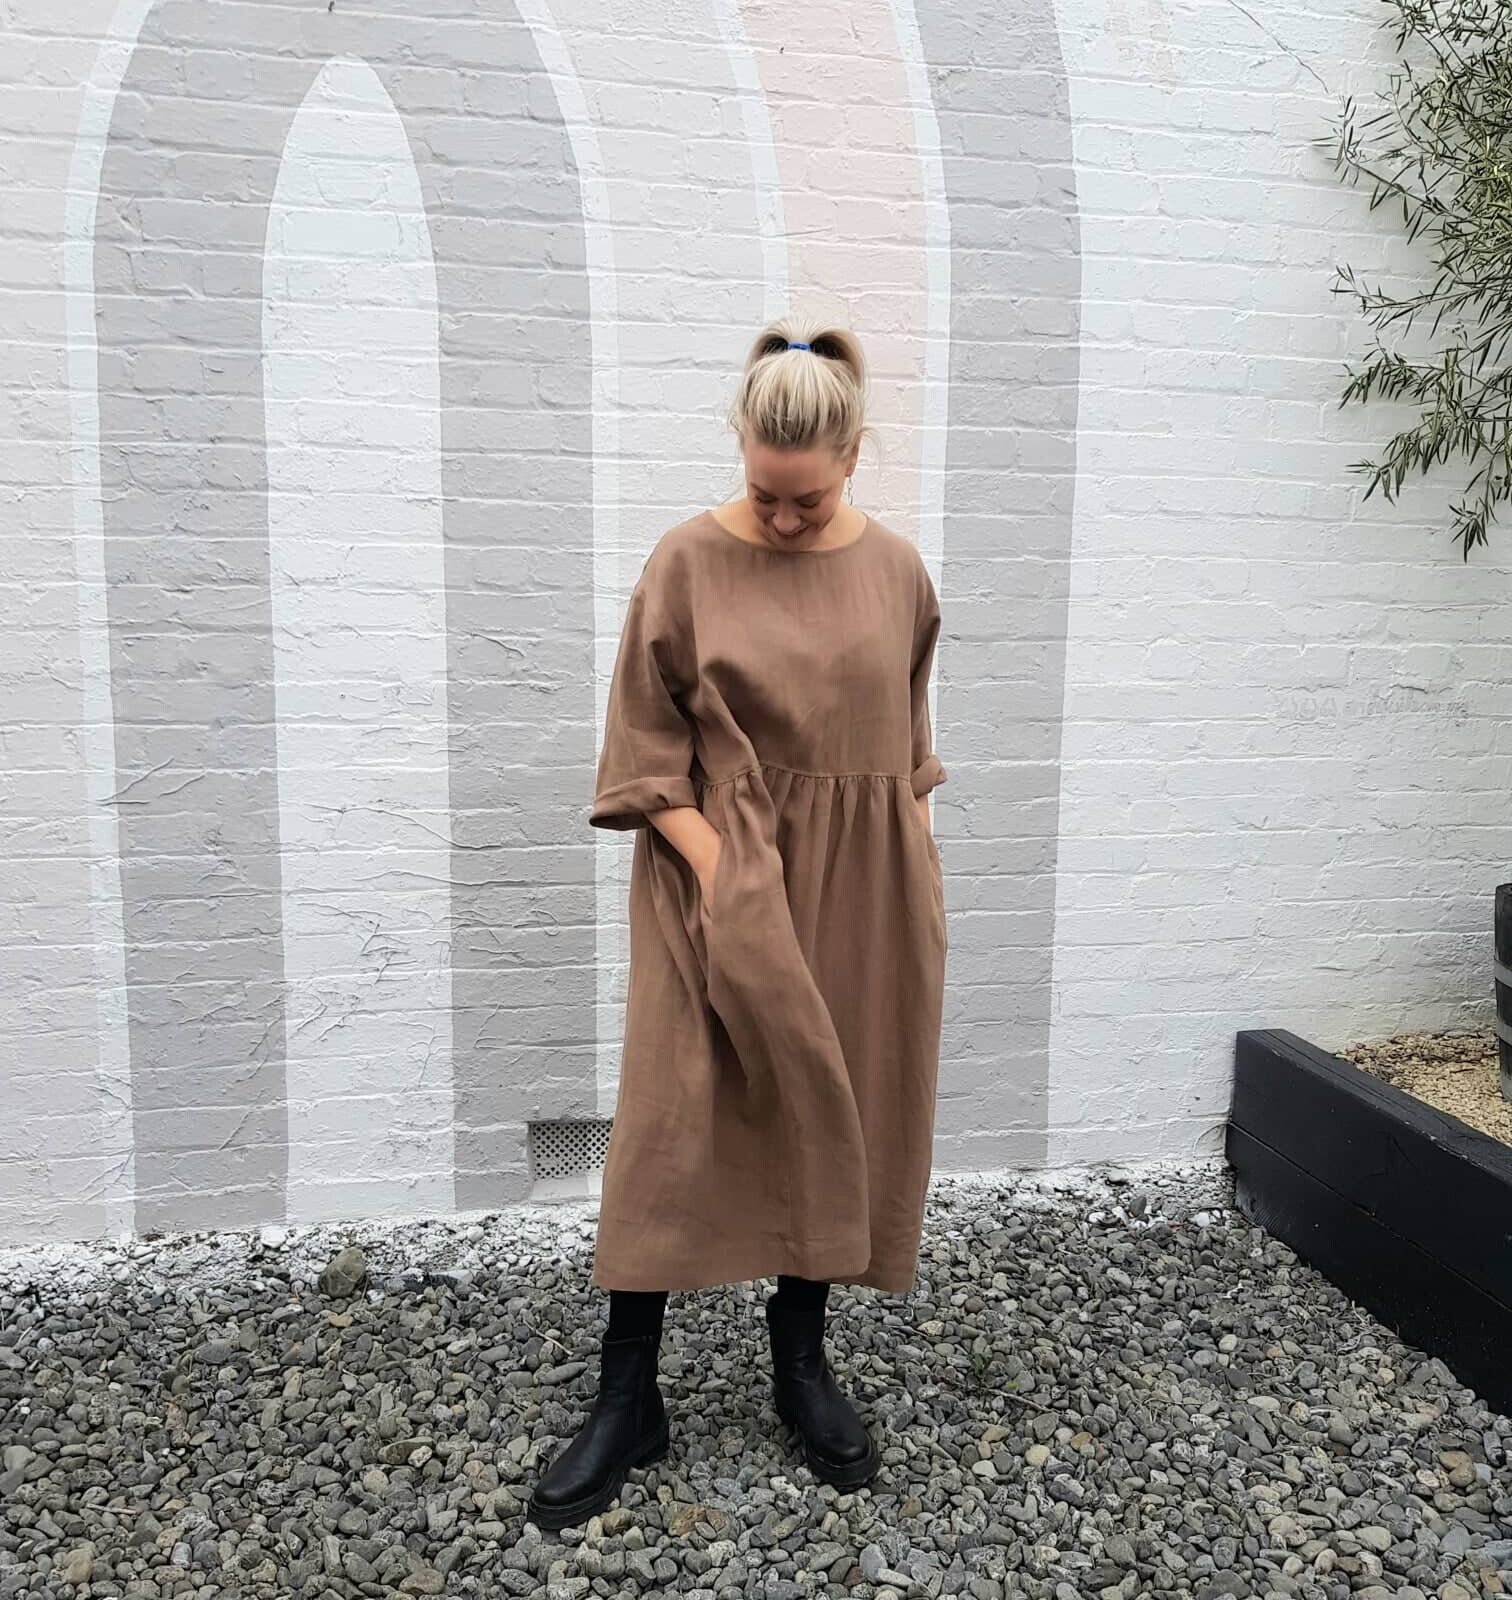 17blonde | NZ made natural fibre clothing..comfort+sustainable+ethical